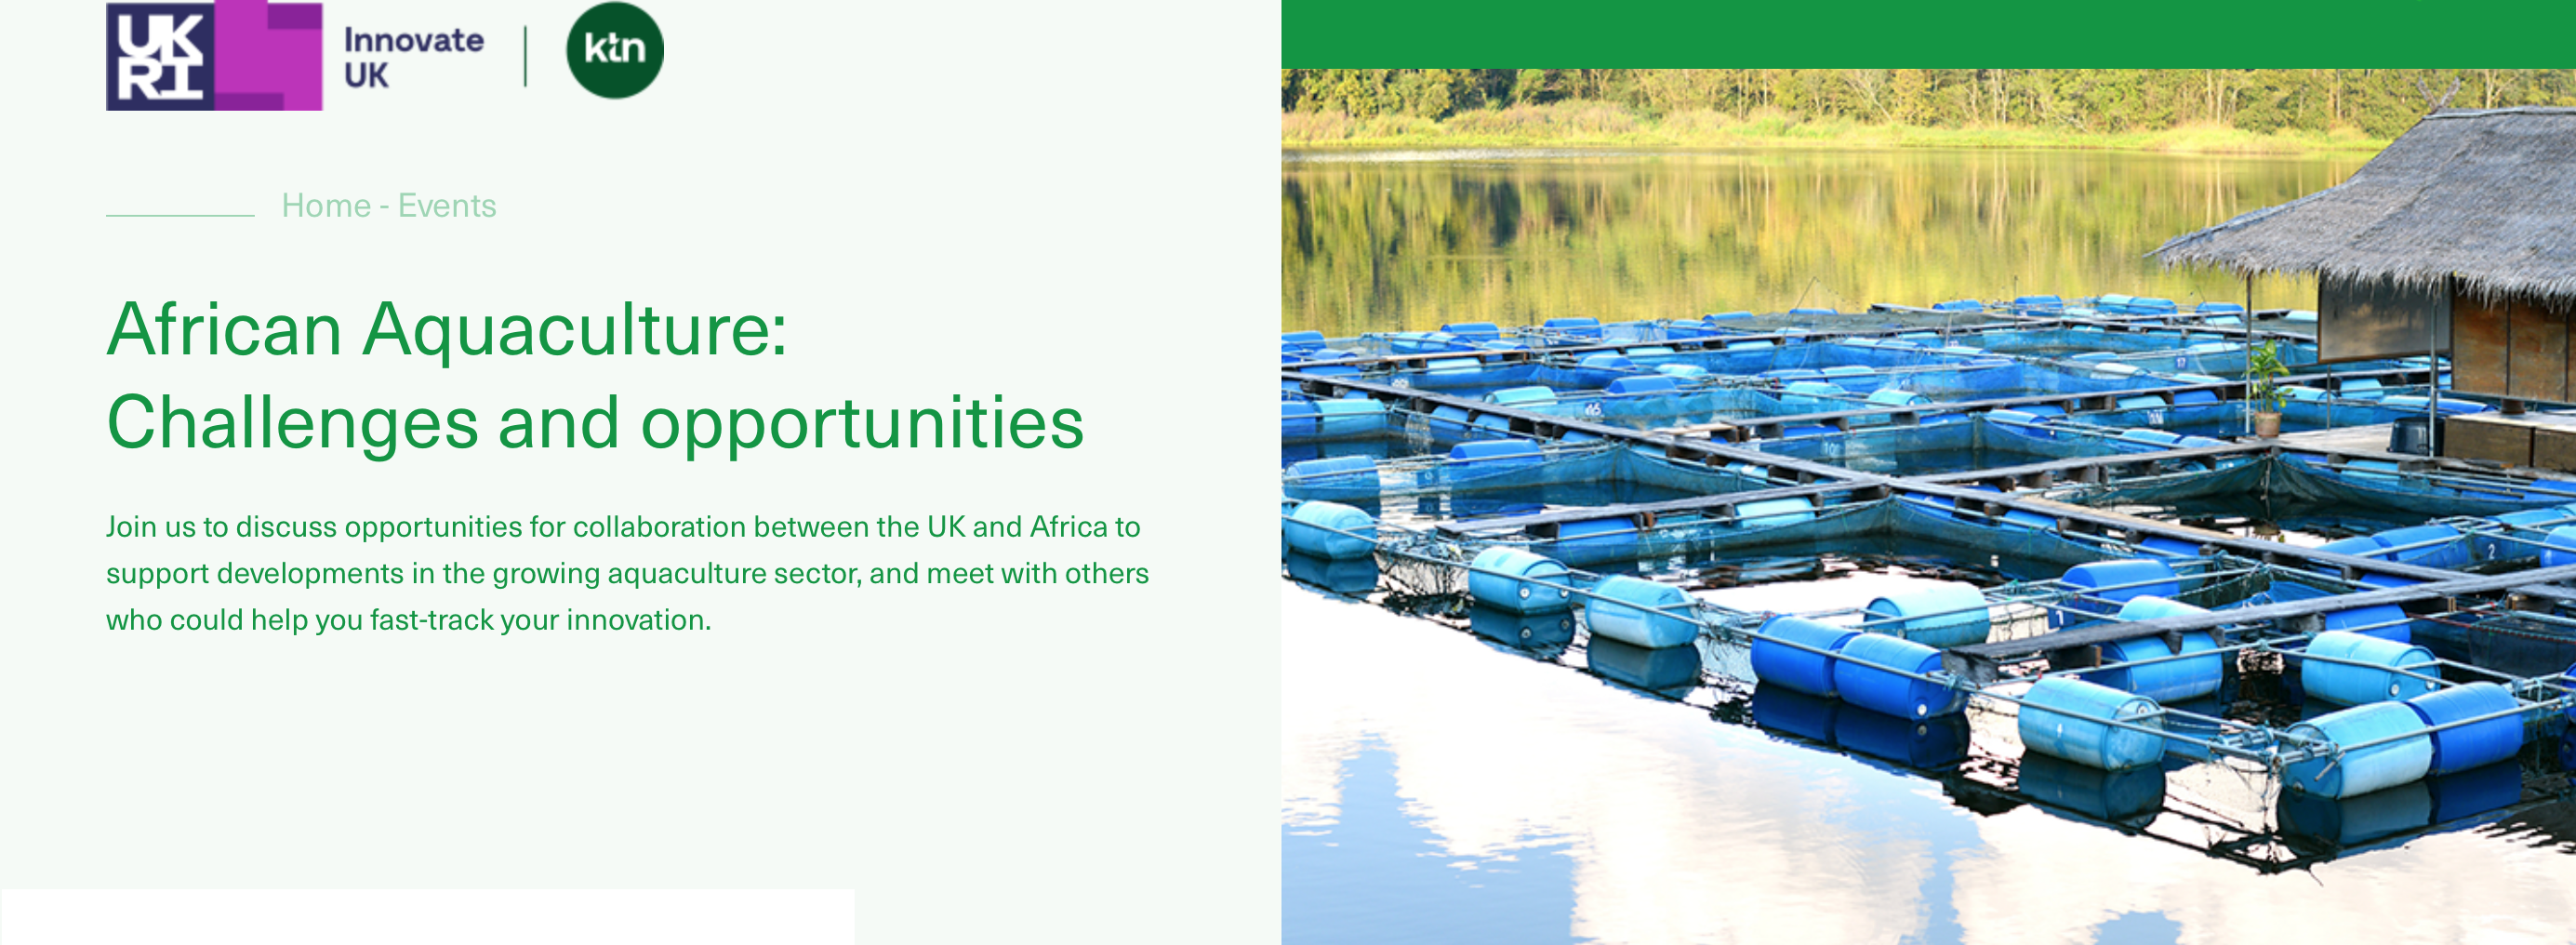 African Aquaculture: Challenges and opportunities